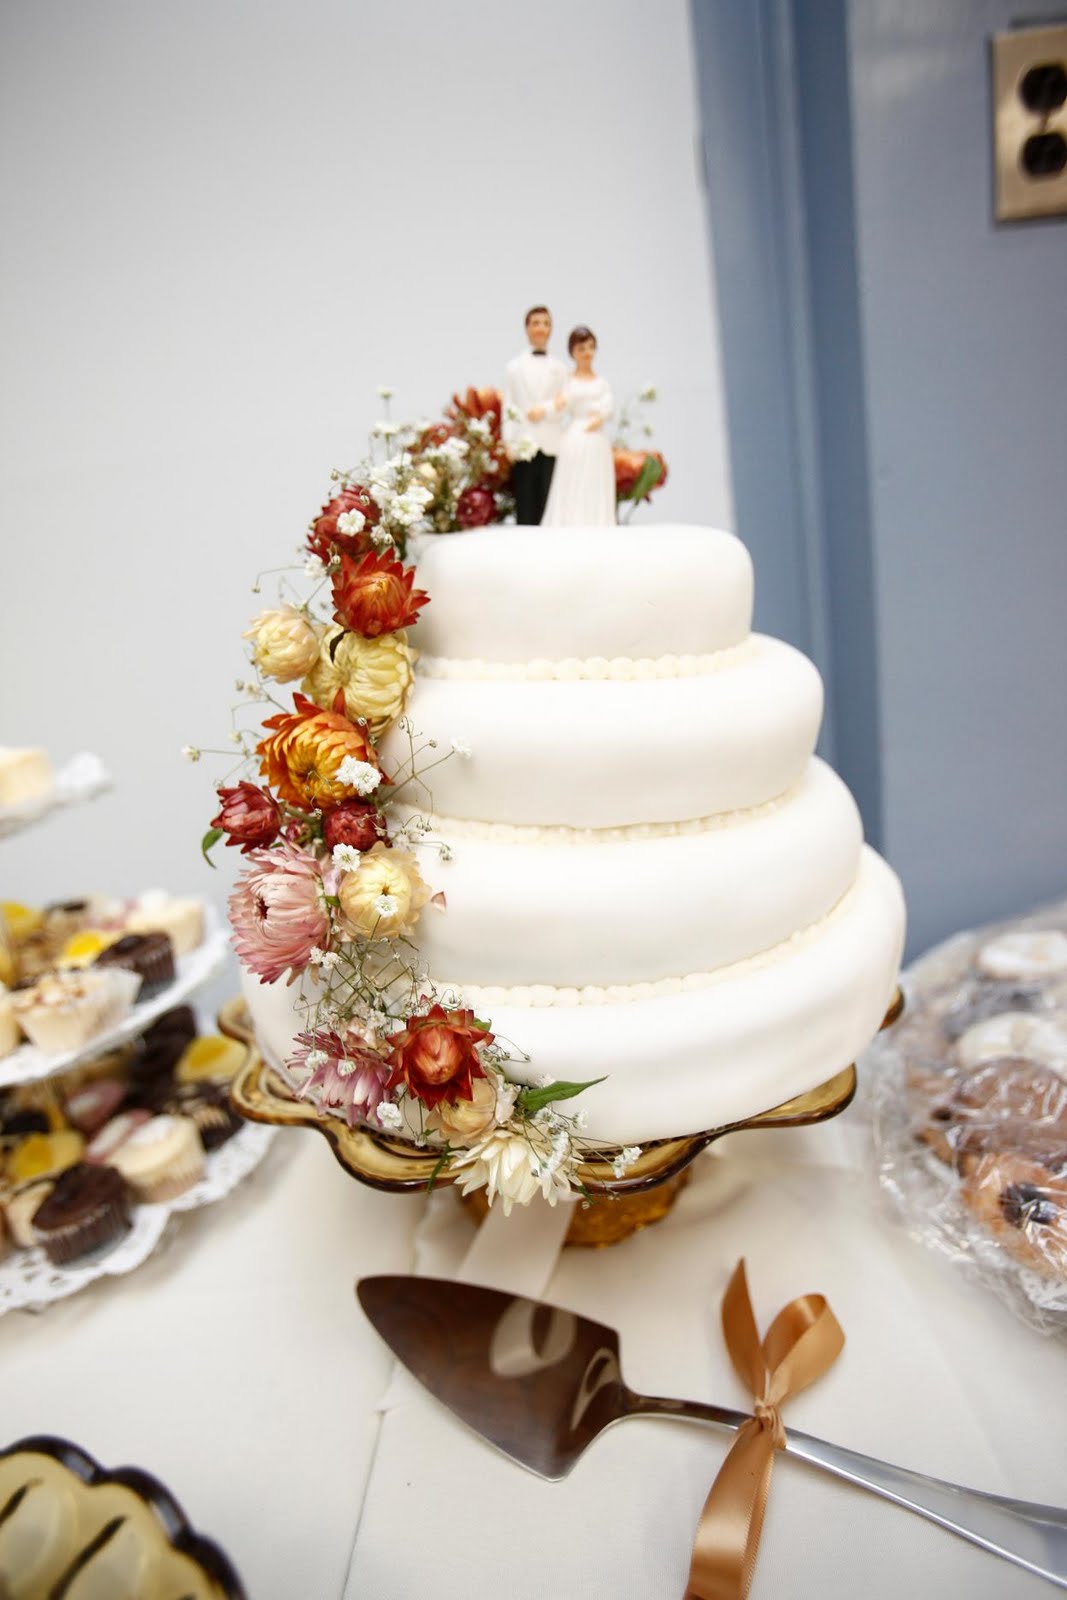 photos of 50th wedding anniversary cakes and tables